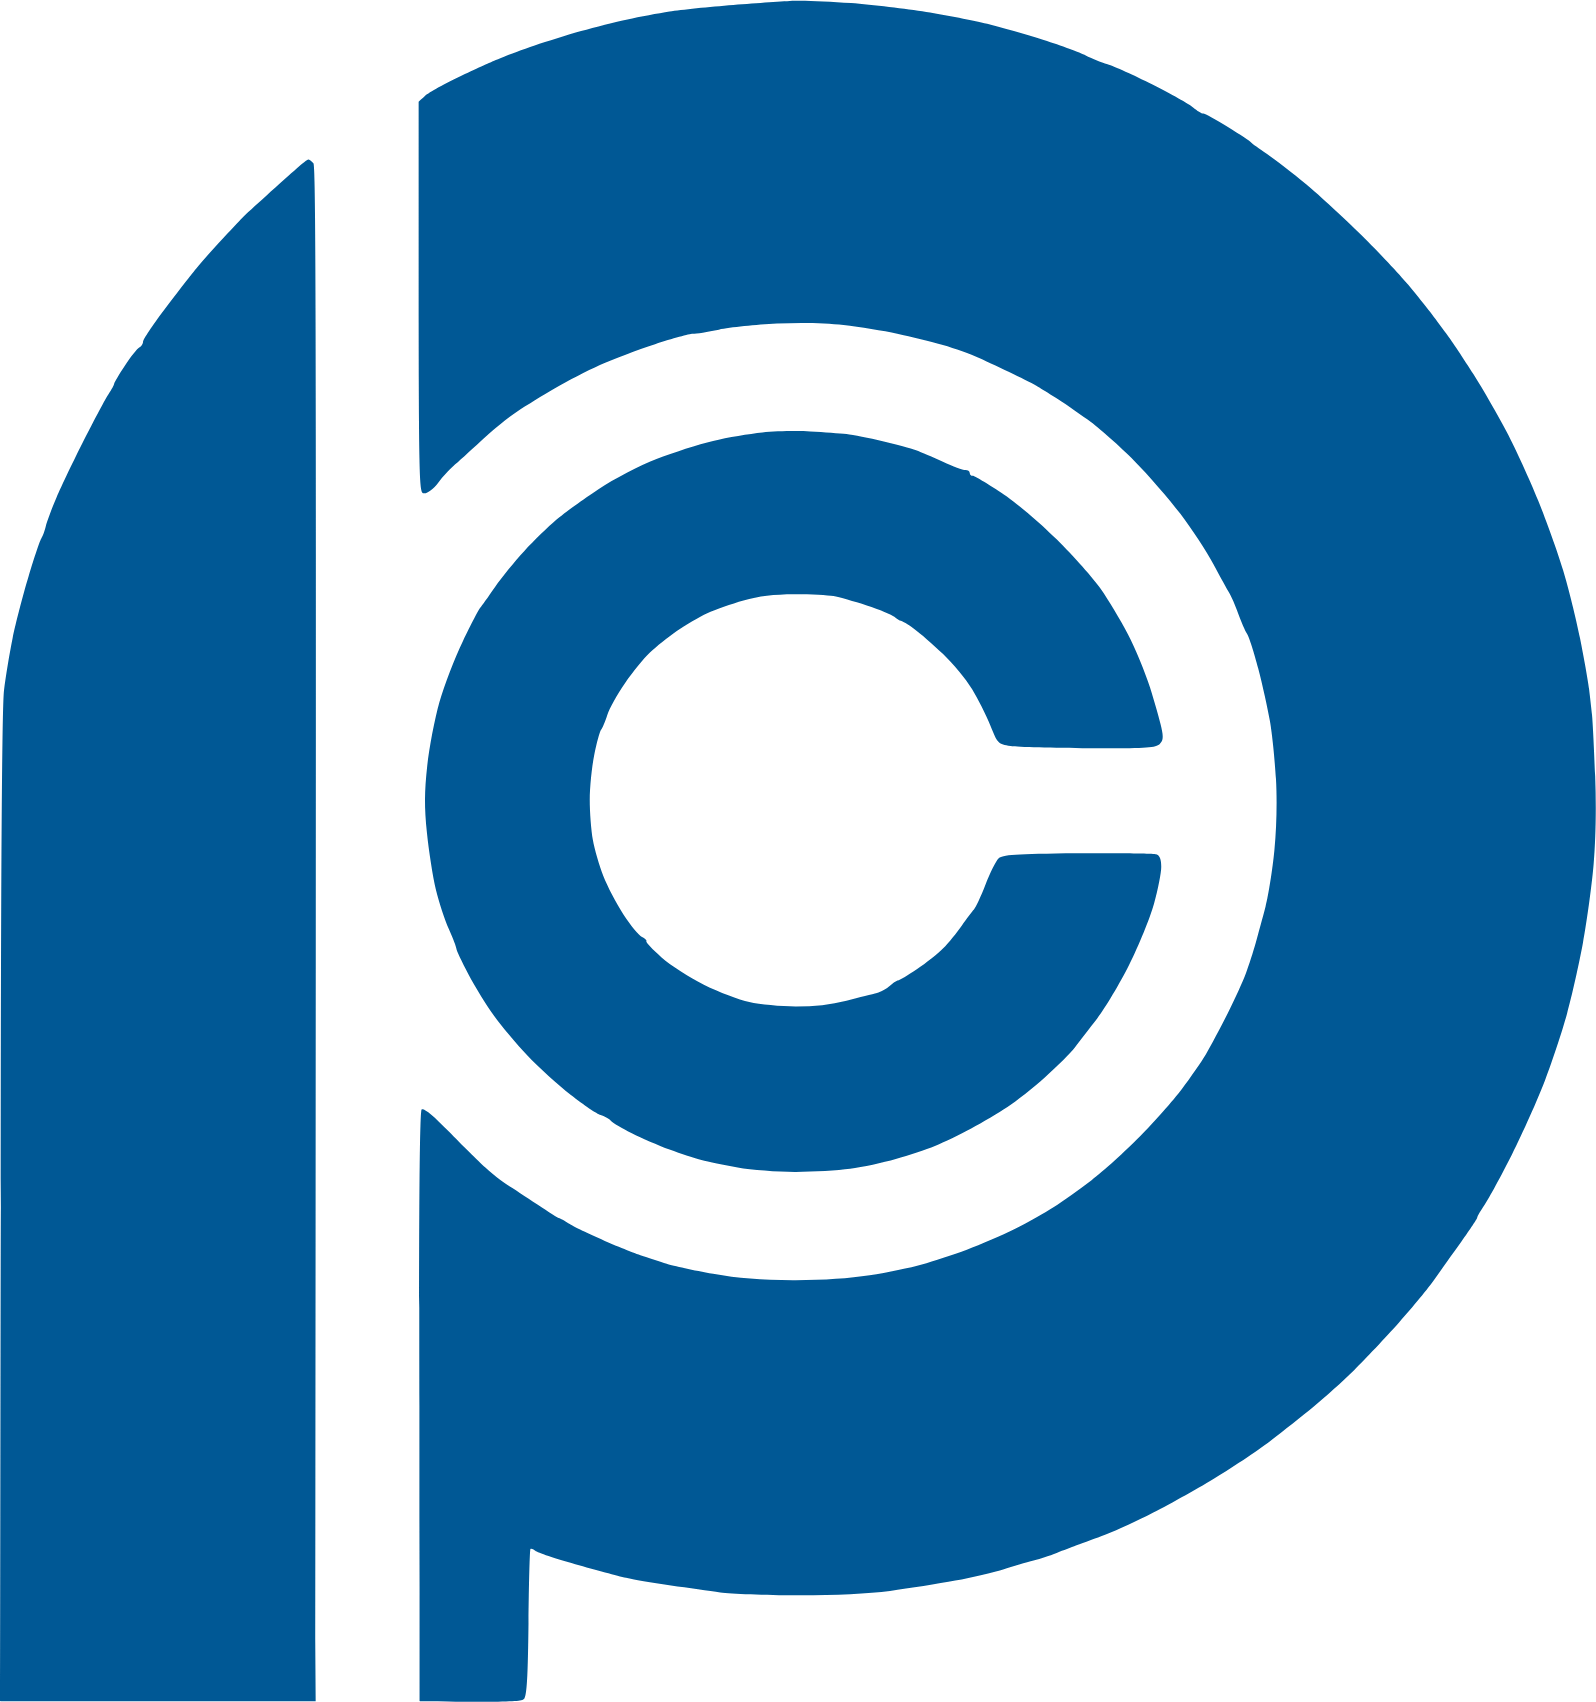 China Pacific Insurance logo (PNG transparent)